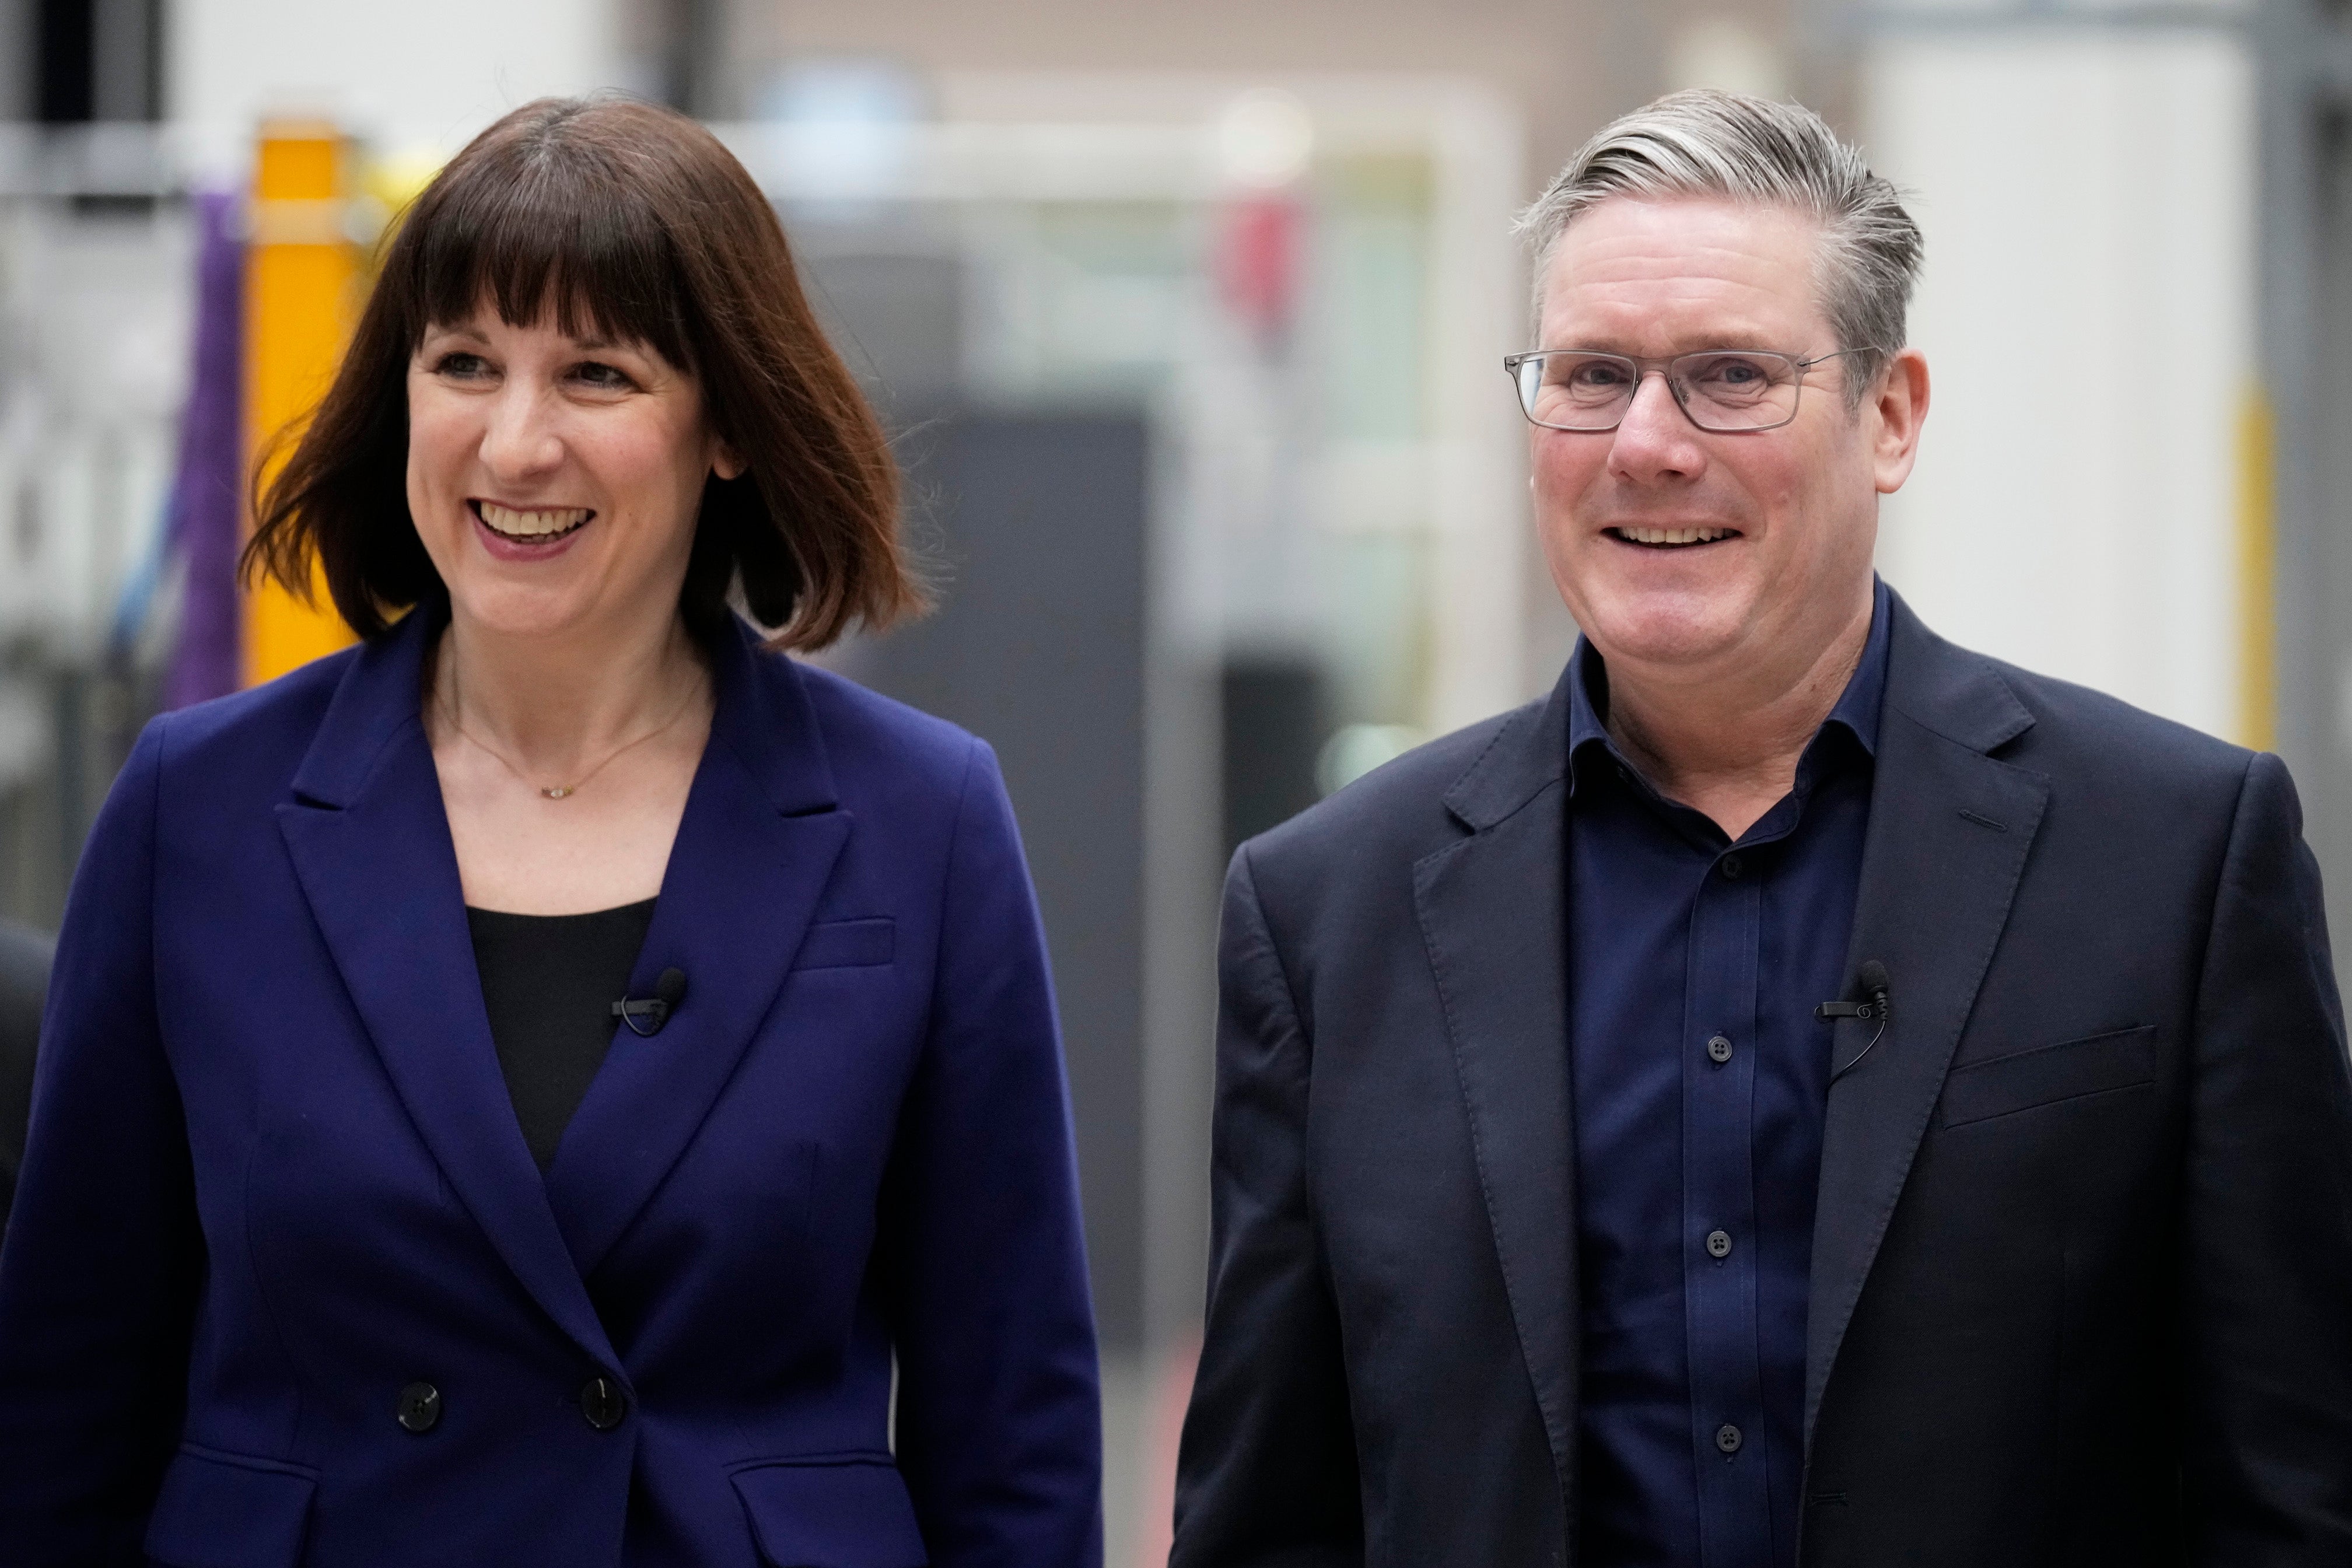 Rachel Reeves and Keir Starmer on a visit to Coventry on Friday